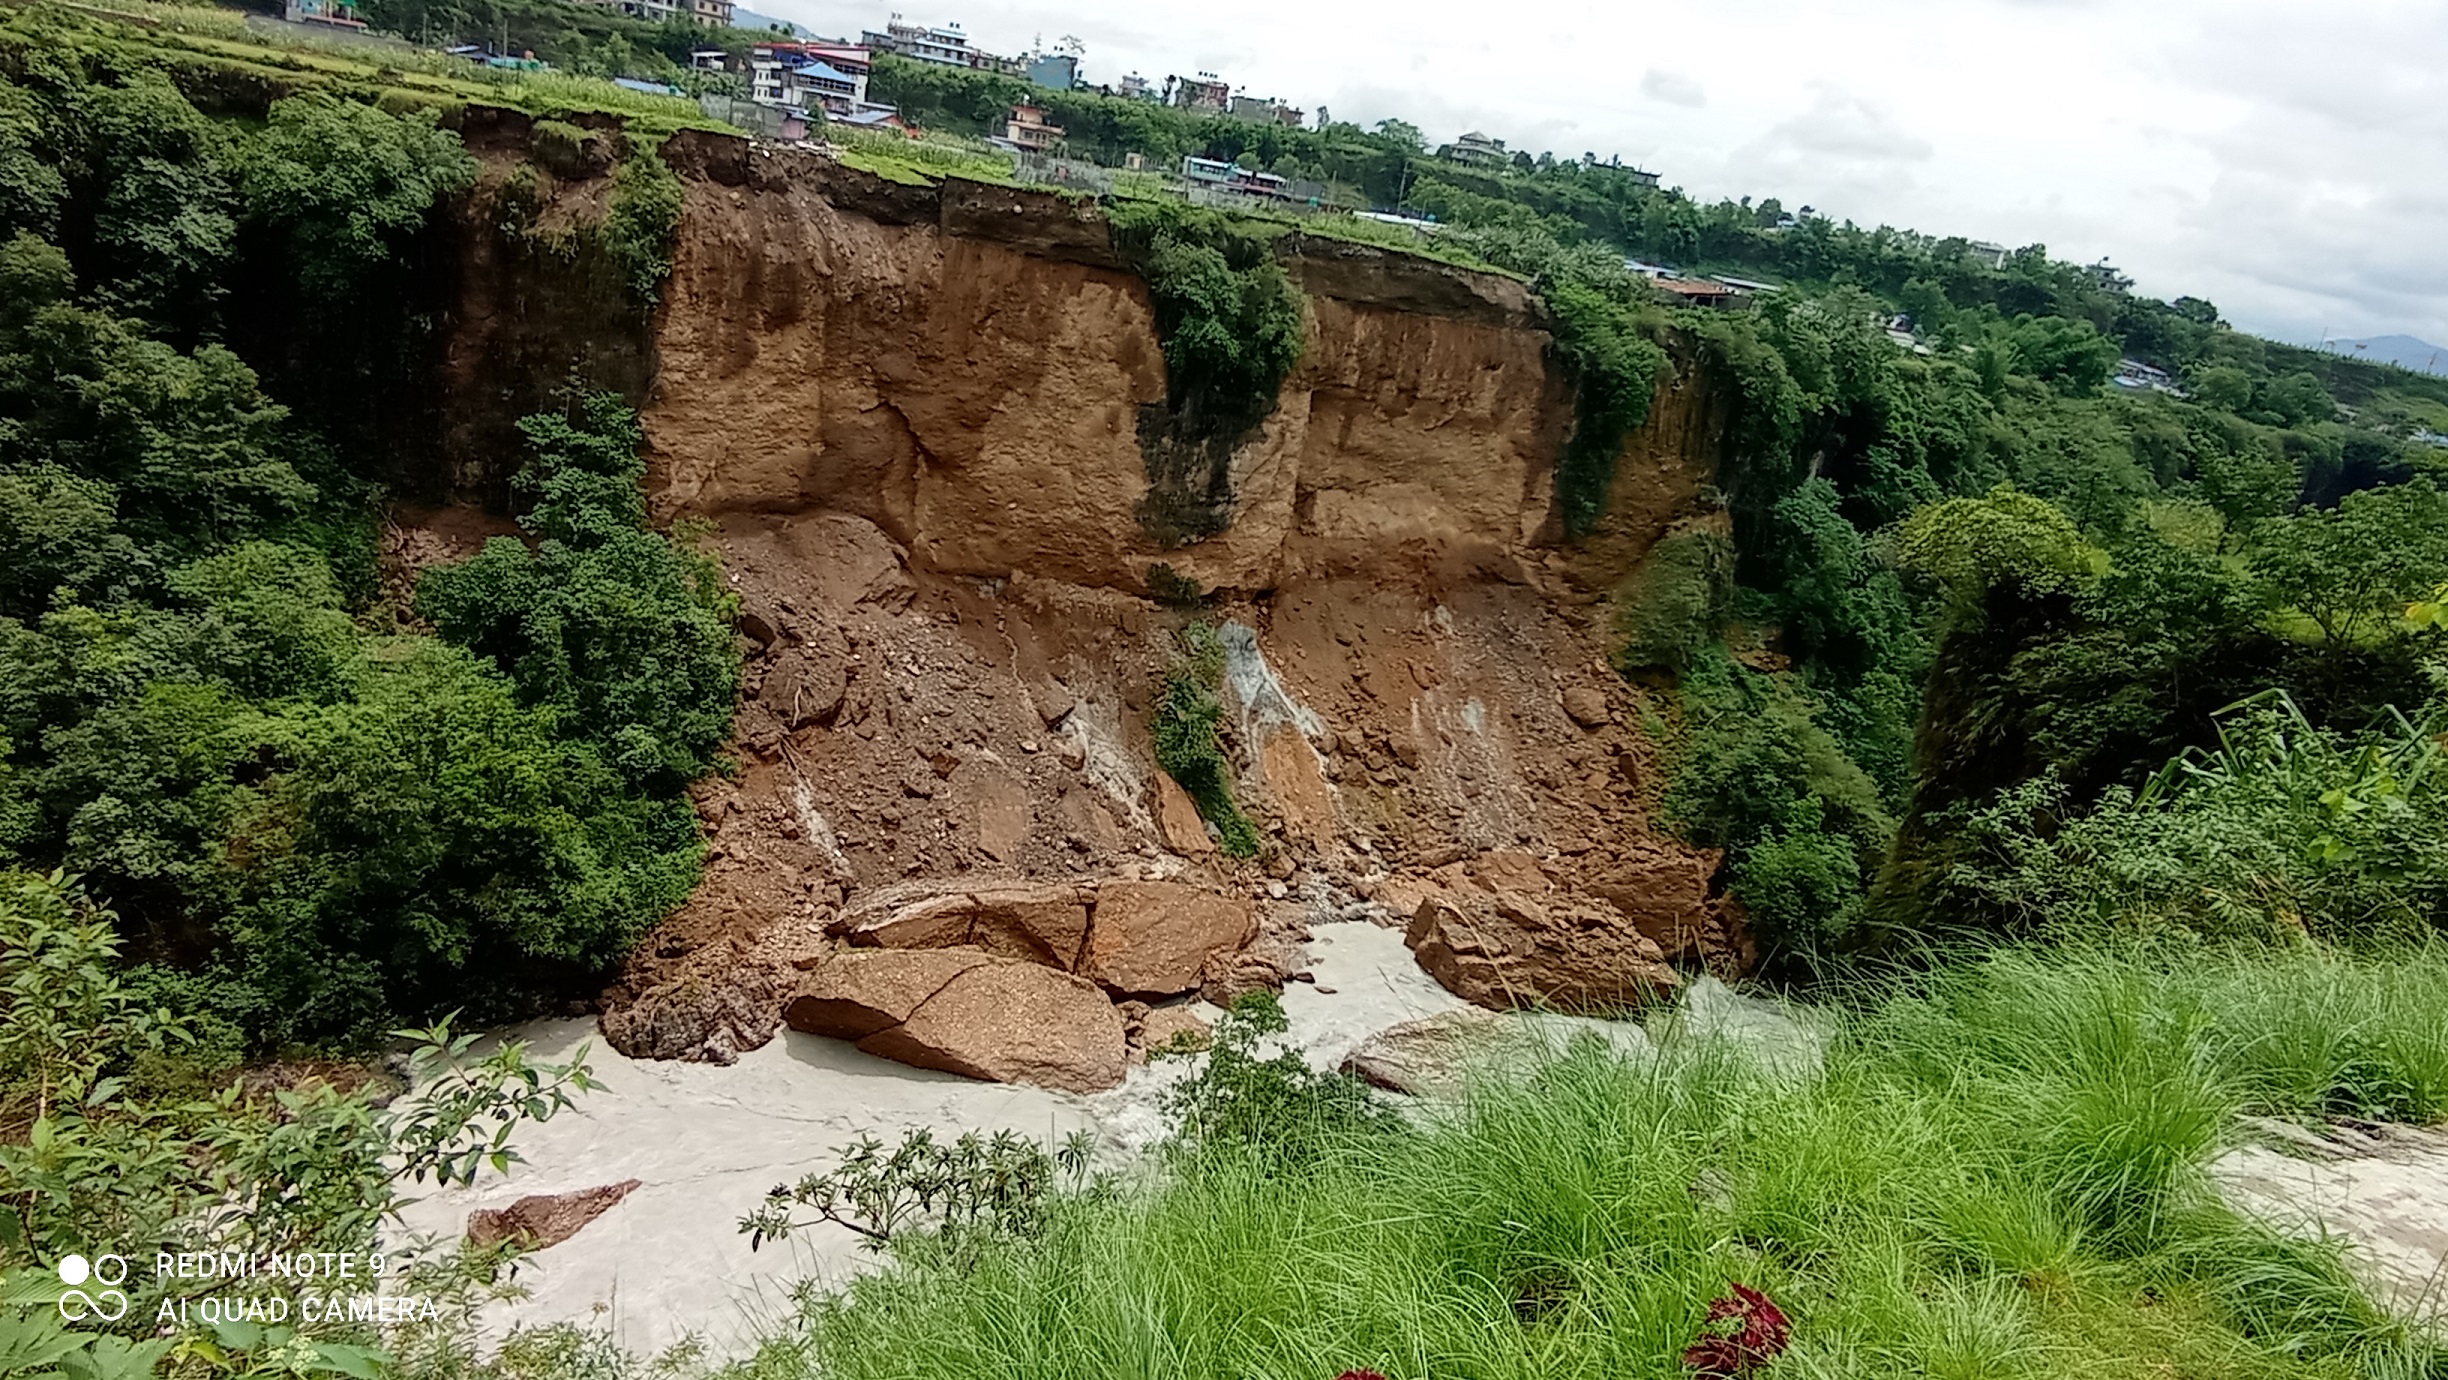 The water source supply destroyed as a result of a landslide